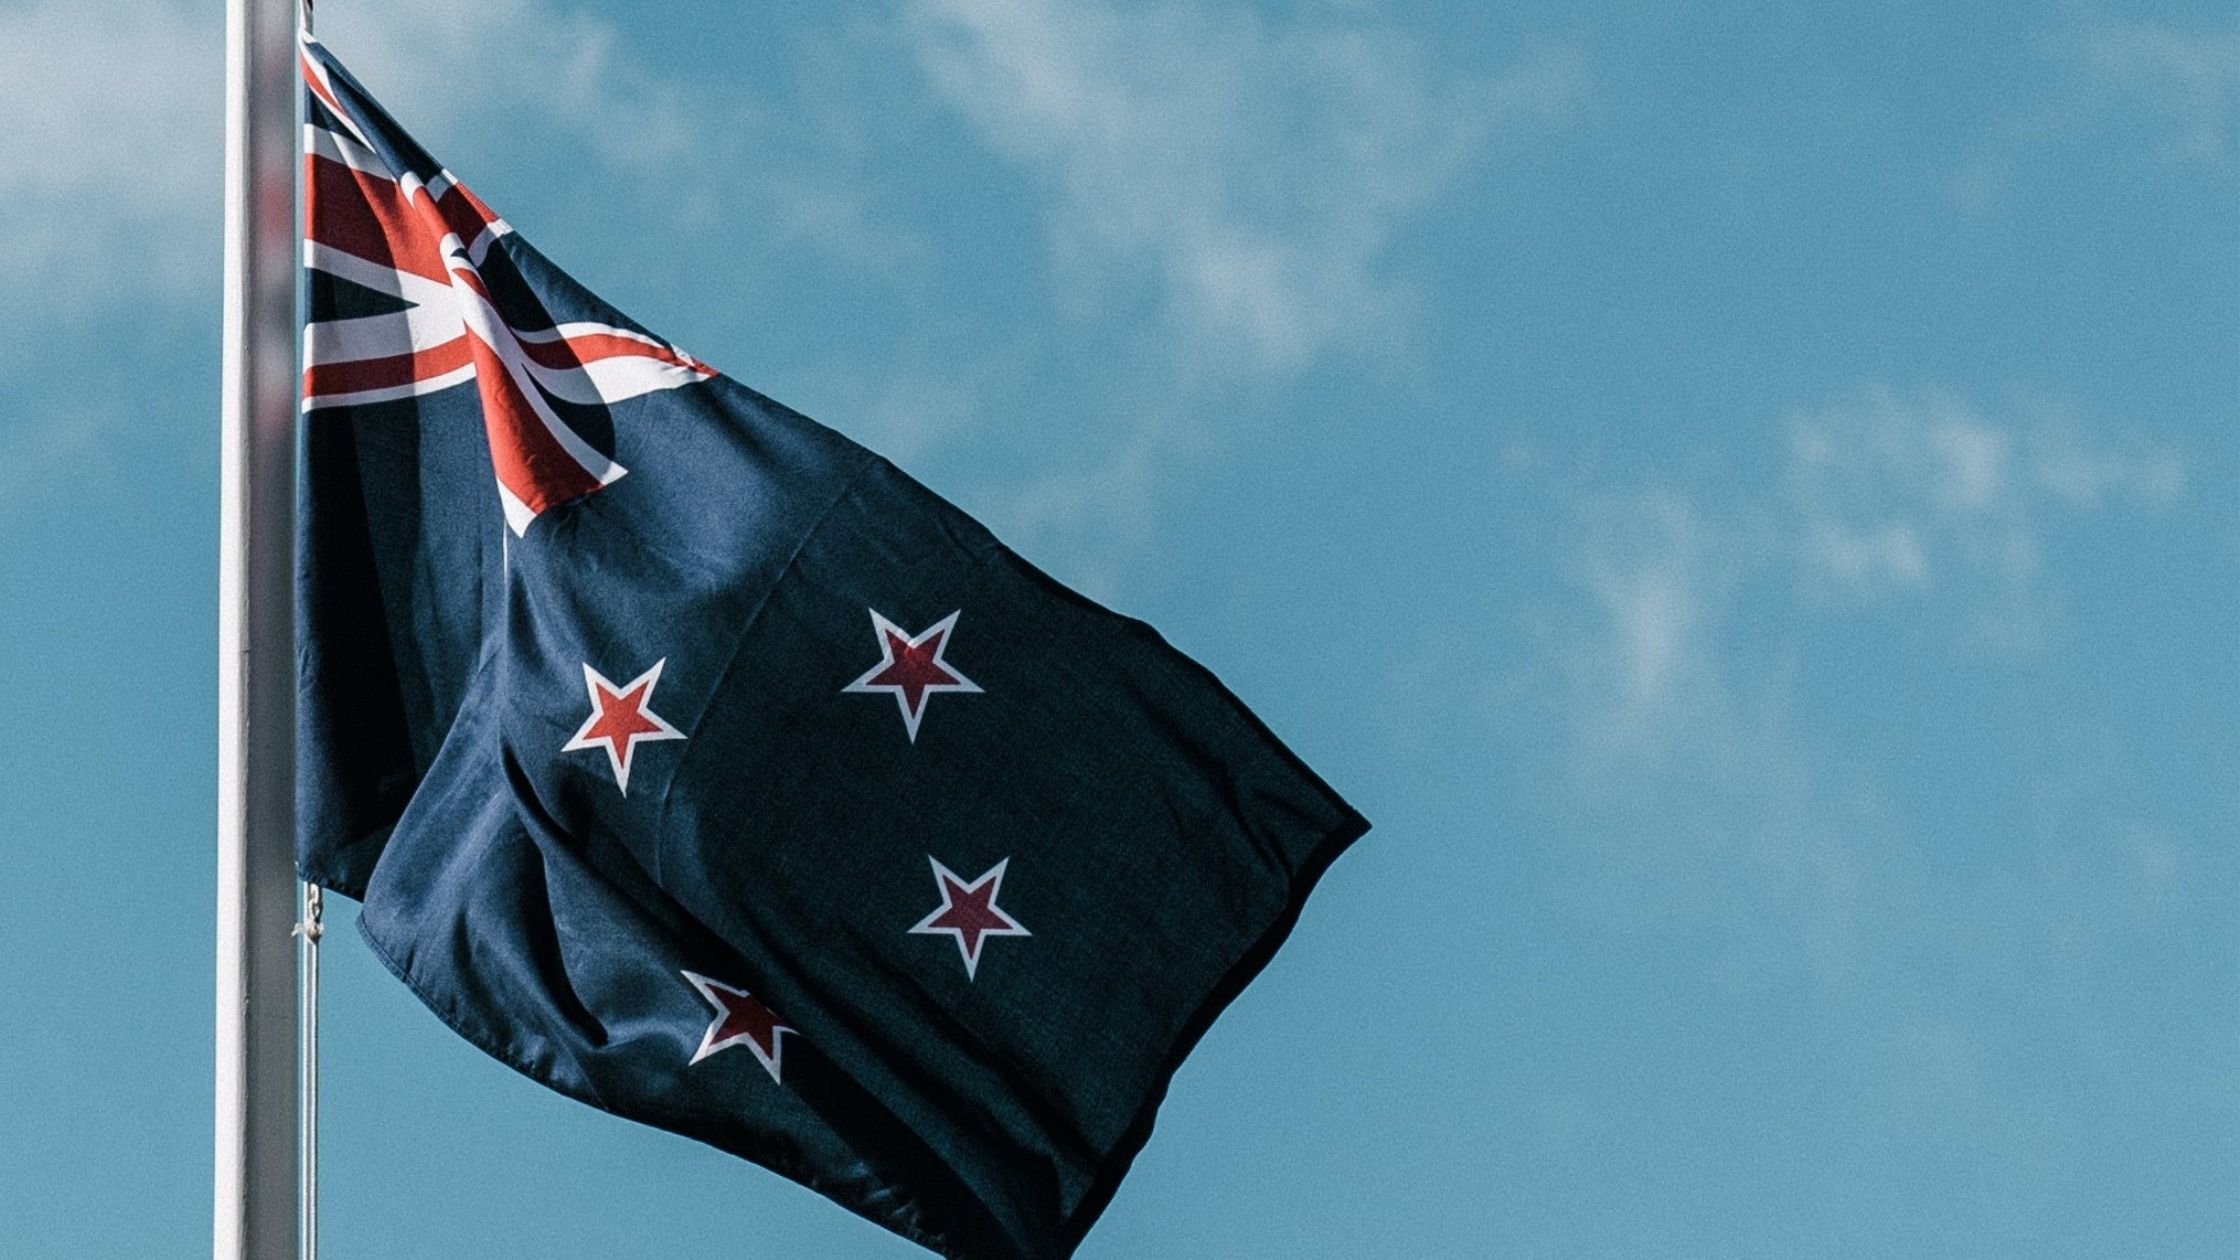 New Zealand is not a member of the European Union. Photo by Dan Whitfield from Pexels